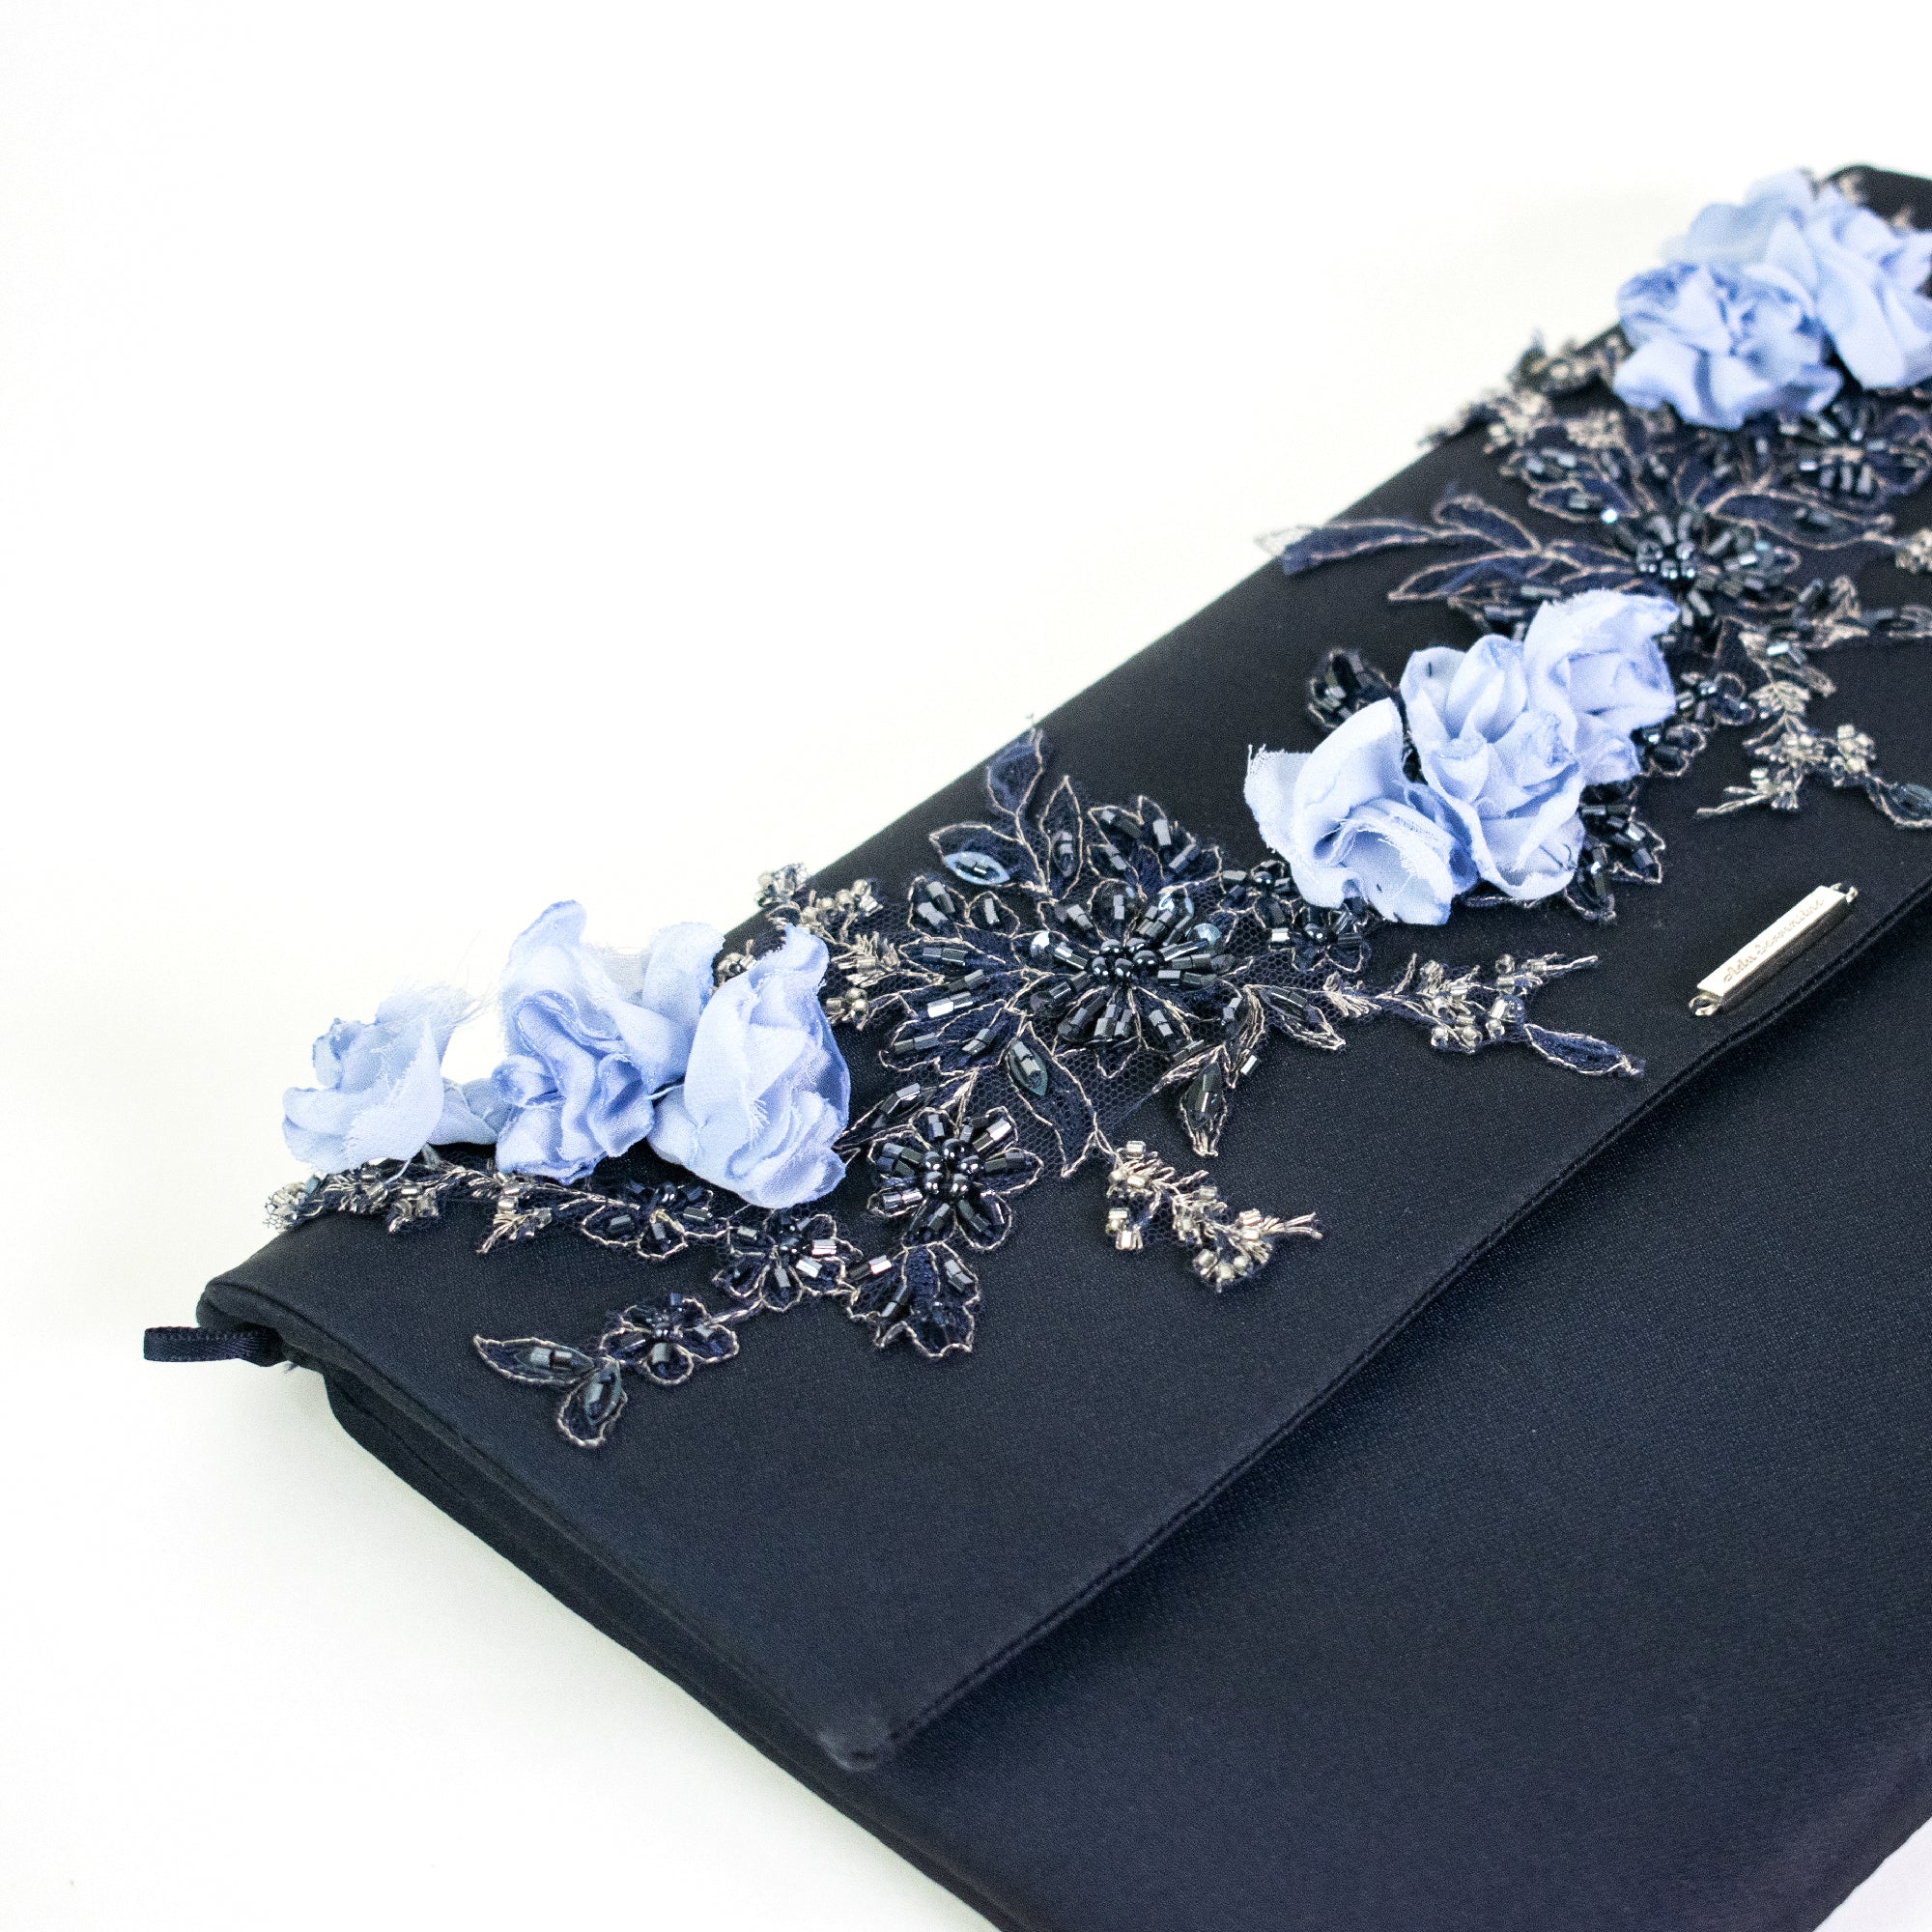 Blue clutch bag with three-dimensional flowers